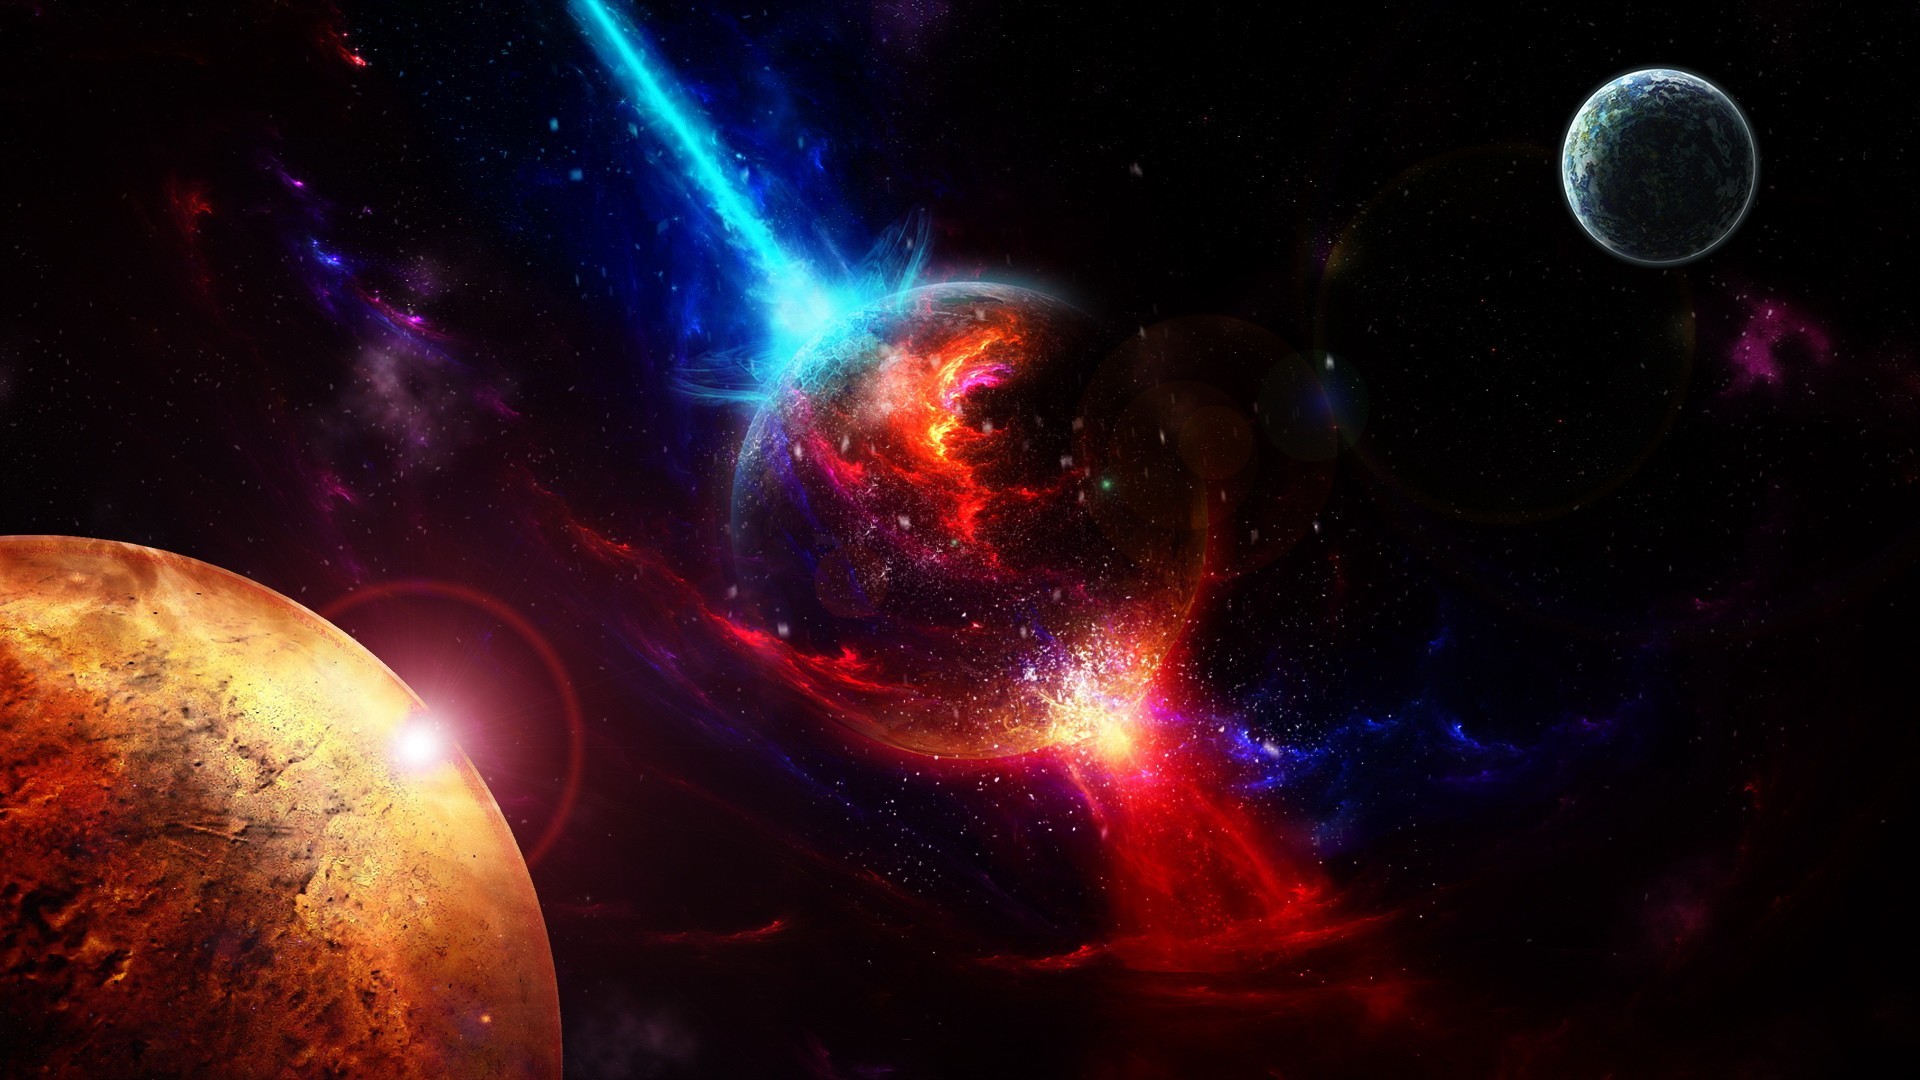 1920x1080 Explosion, In, Space, Galaxies, Stars, Planets, Hd, Desktop, Wallpaper,  Background, Free, Amazing Artworks, High Resolution, Abstract, 1920Ã1080  Wallpaper ...